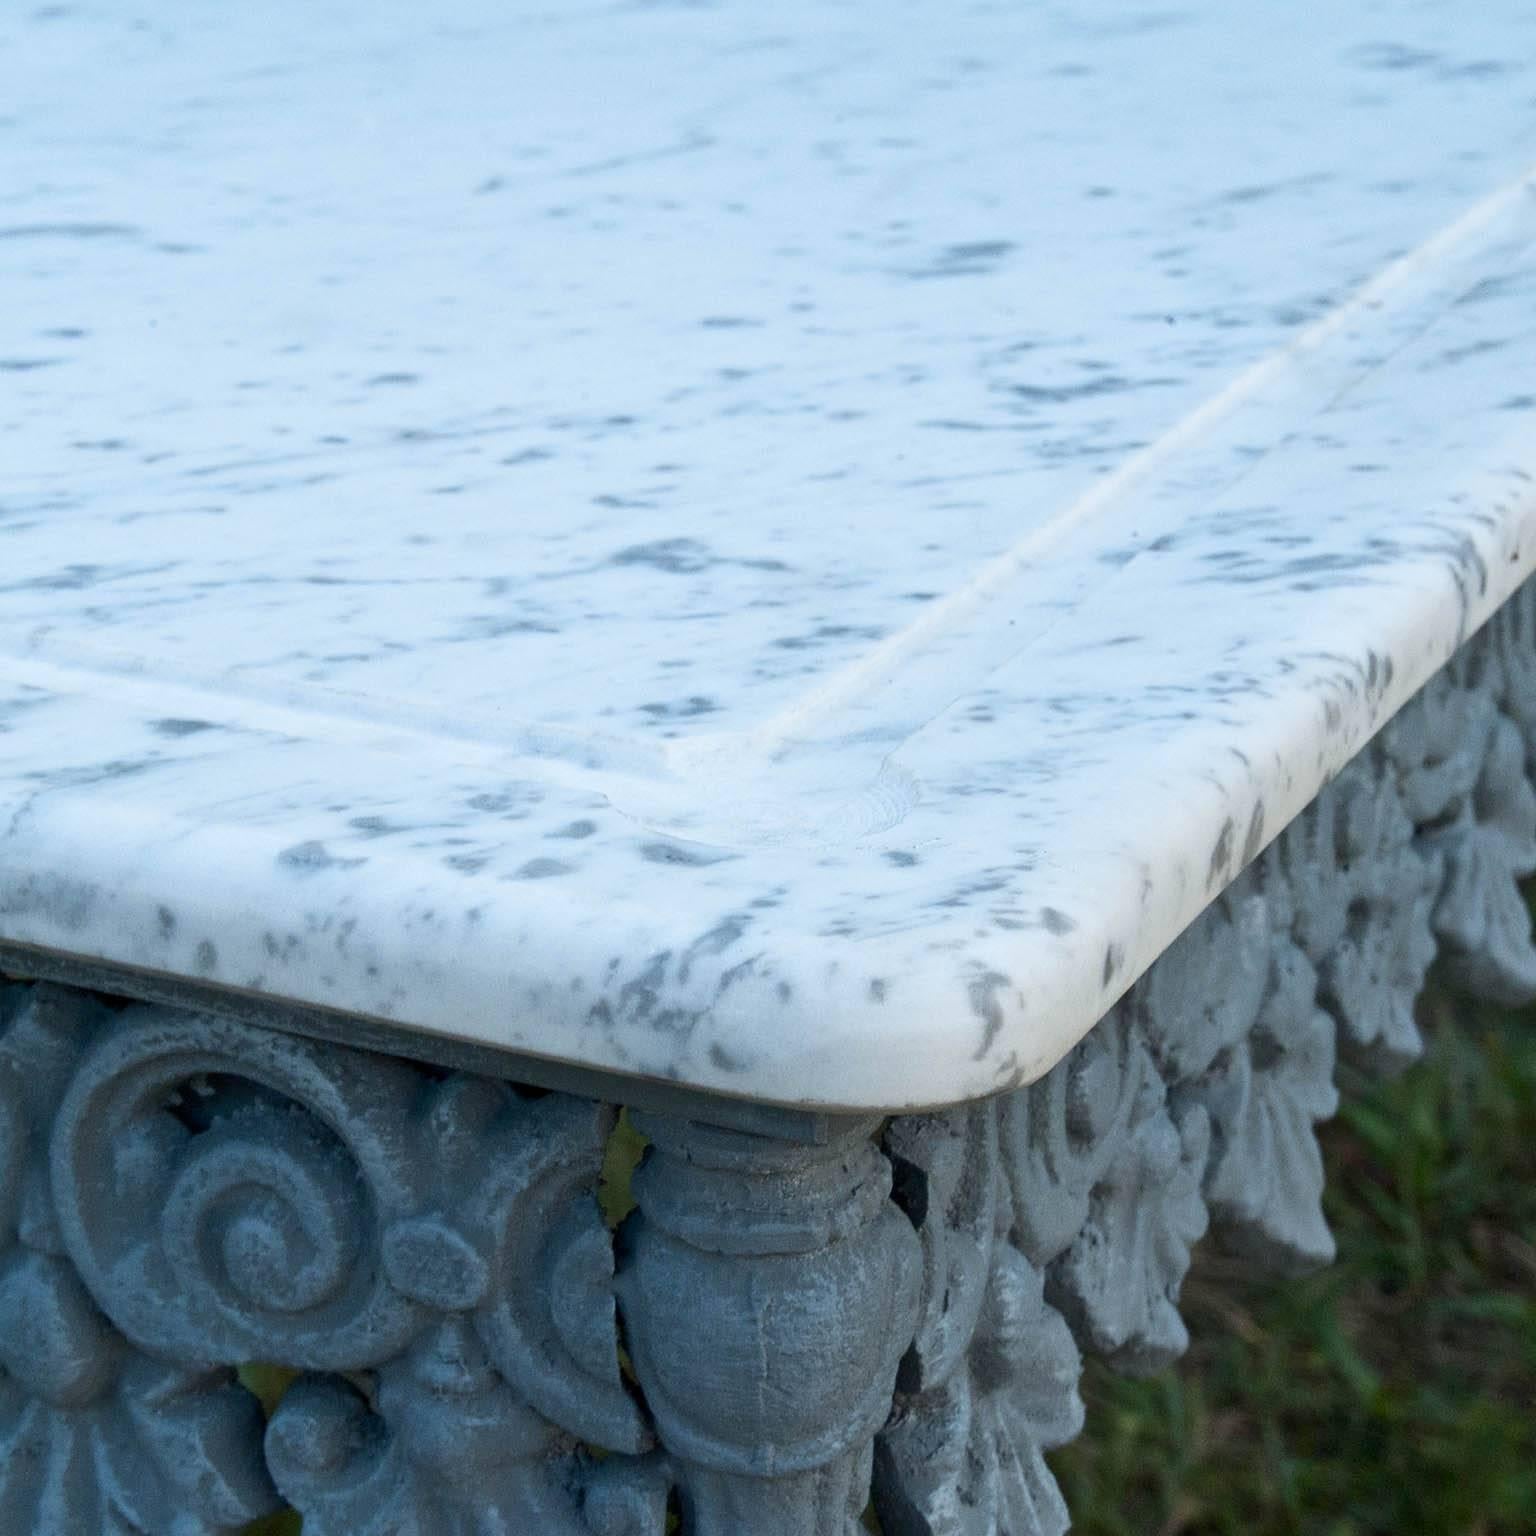 This very decorated console table has been made of a wrought iron base and a cast iron ornate frame, which is topped with an elegant white Carrara marble top with rounded edges. This “Fin De Siecle” butcher table is still seen throughout France, due